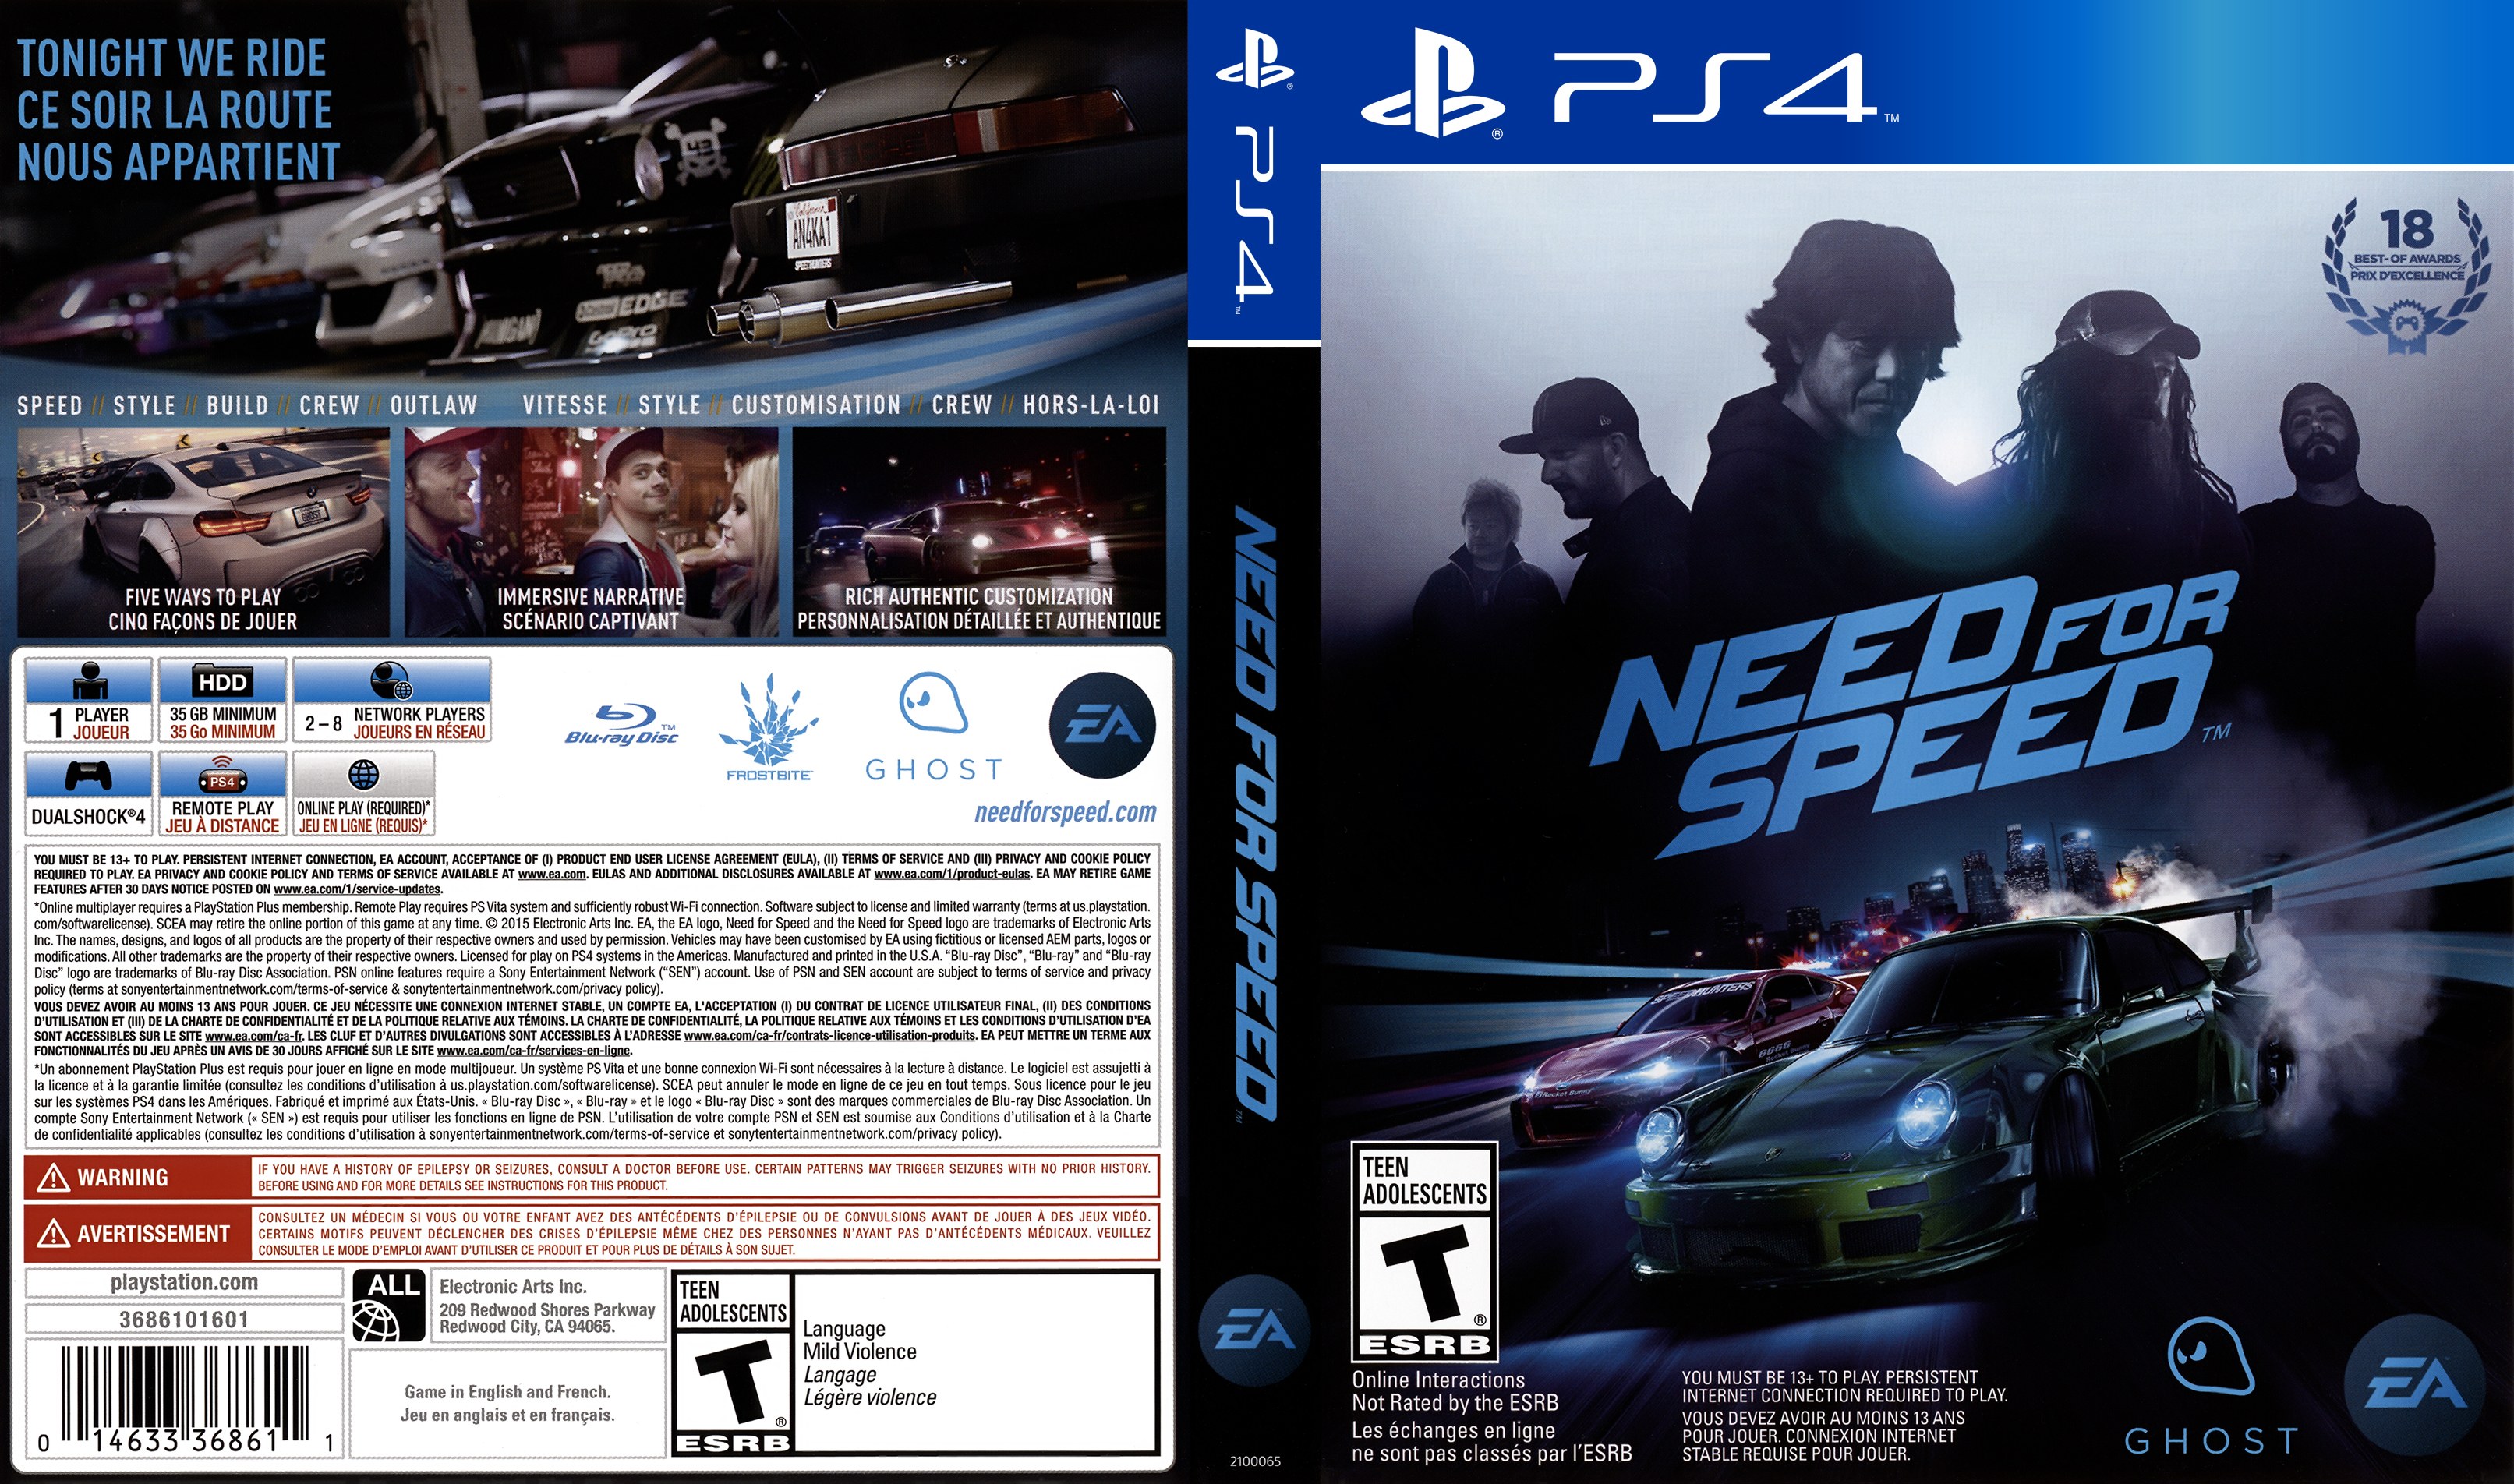 Ps4 2015. Need for Speed 2015 ps4 диск. NFS PLAYSTATION 4 обложка. Need for Speed диск на ПС 4. Игра need for Speed на PLAYSTATION 4.